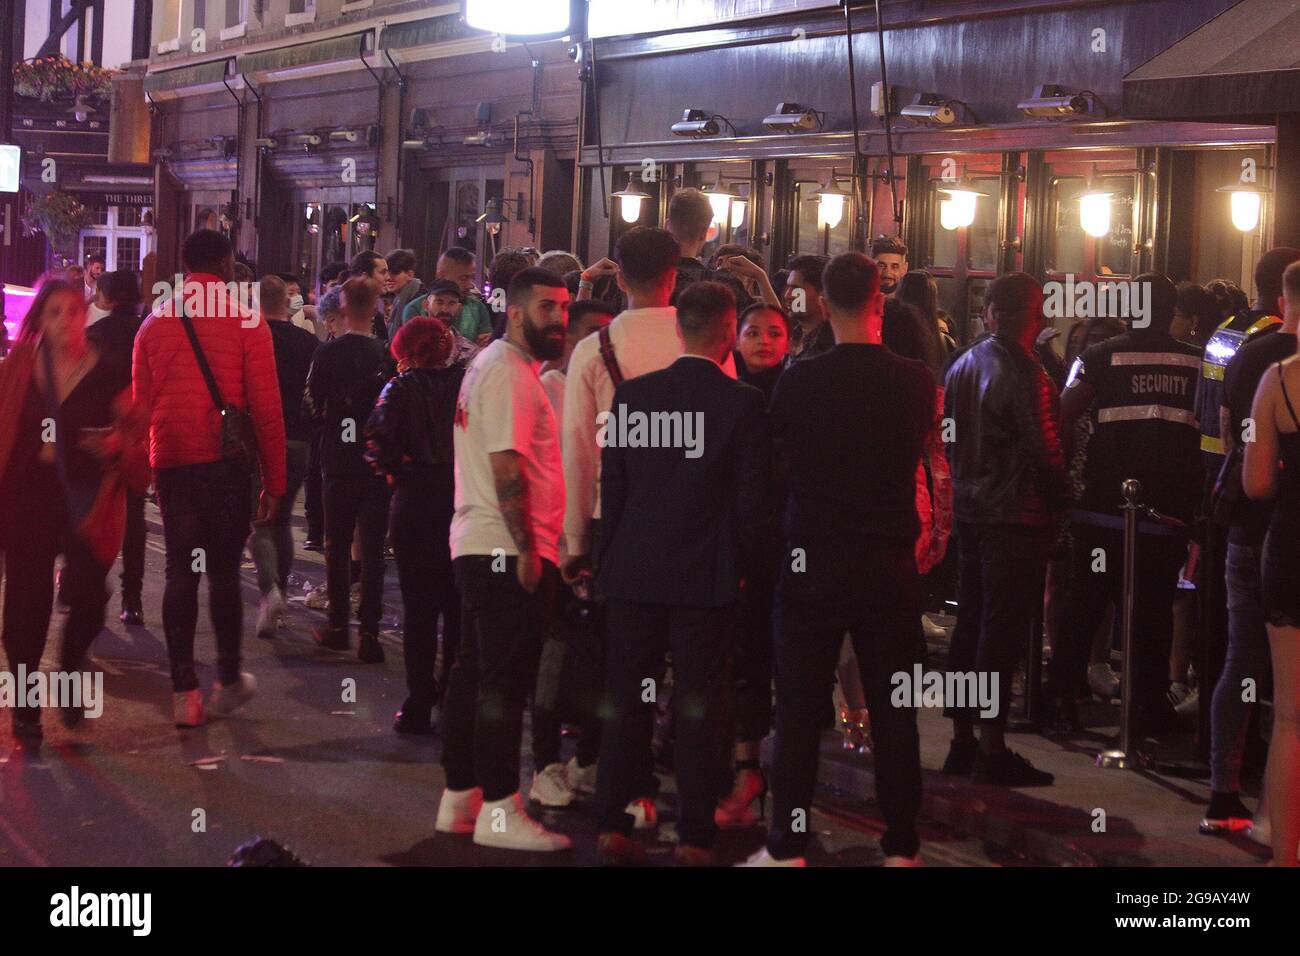 https://c8.alamy.com/comp/2G9AY4W/old-compton-street-in-soho-was-very-full-with-people-on-the-first-saturday-of-freedom-no-one-knows-if-this-was-the-first-and-the-last-saturday-of-freedom-but-people-went-out-and-had-a-good-time-drinking-eating-and-dancing-until-5amthere-was-rubbish-everywhere-and-the-cleaners-had-a-very-big-jobit-was-good-to-see-people-out-hope-for-the-best-2472021-blitz-pictures-2G9AY4W.jpg